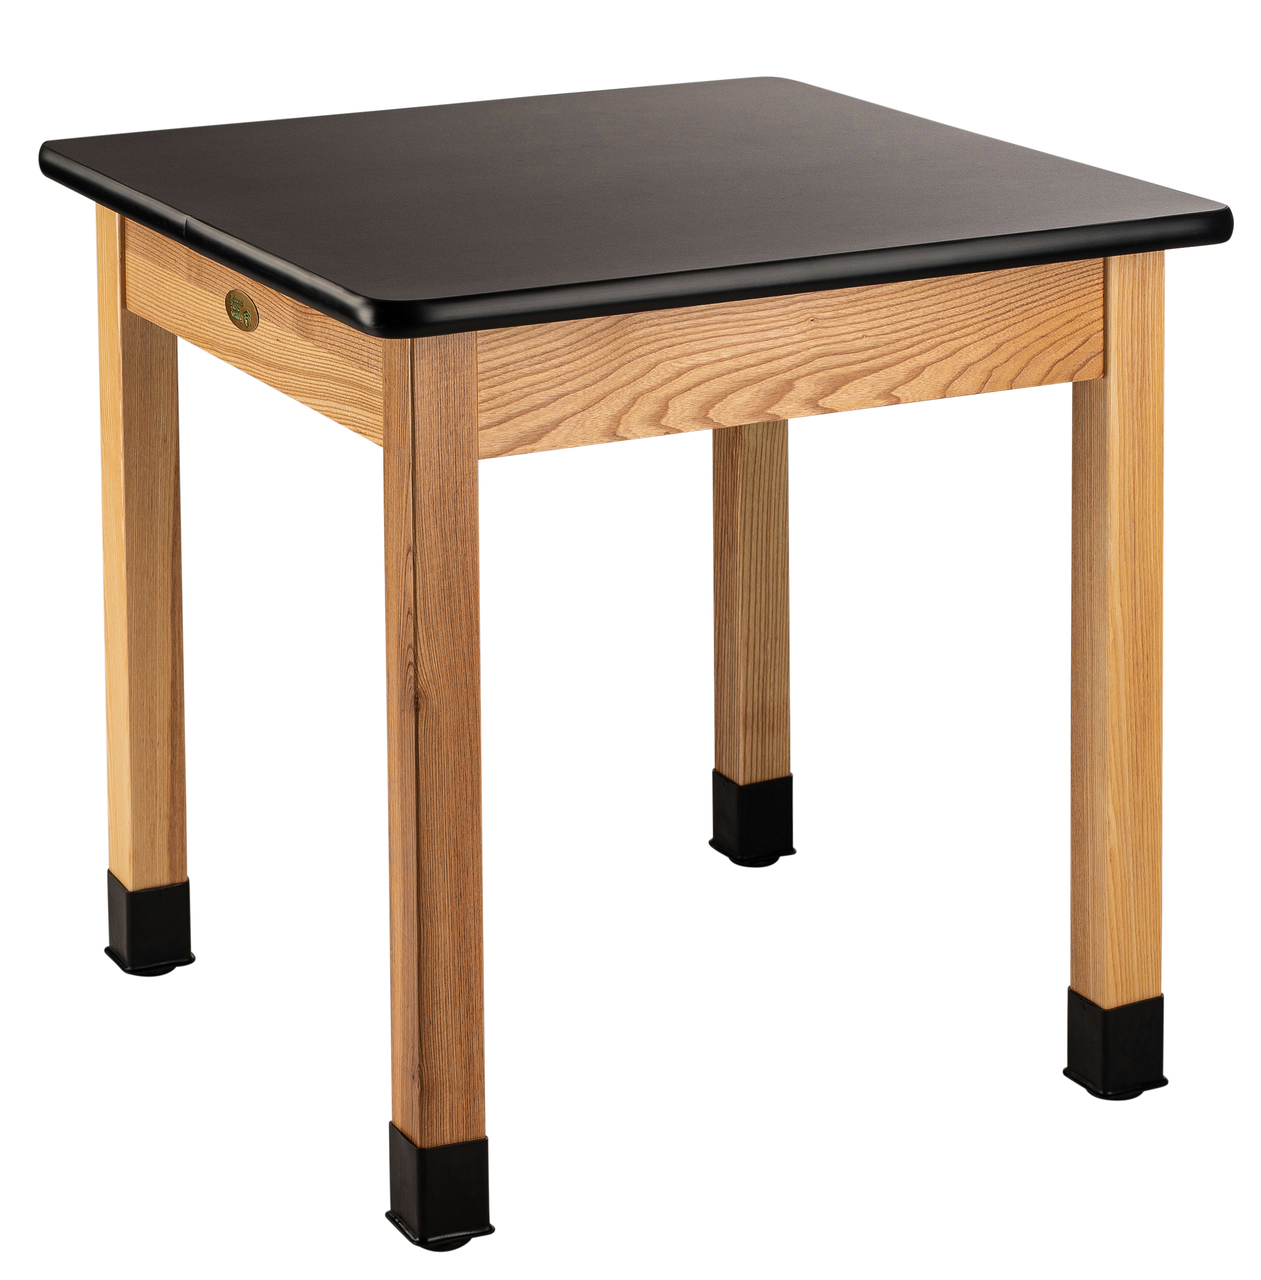 NPS Wood Science Lab Table, 30"x30"x30", HPL Top - Black Top and Ash Leg